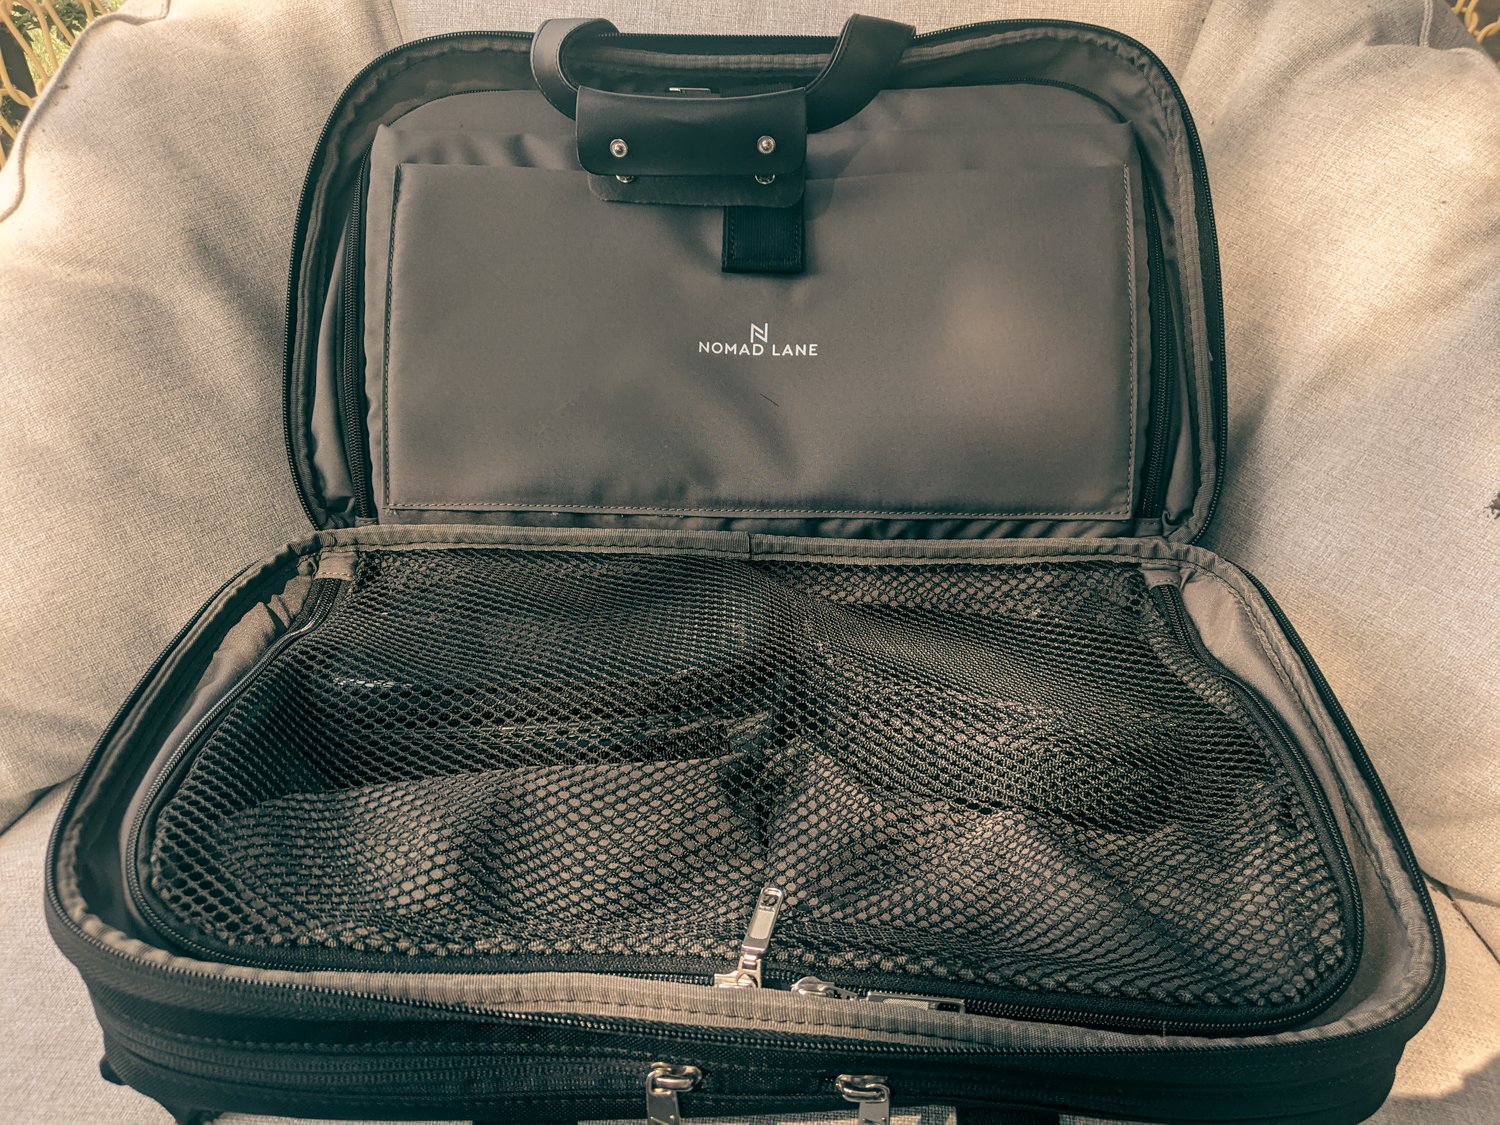 Nomad Lane Bento Bag Review: Is It the Best Travel Companion?